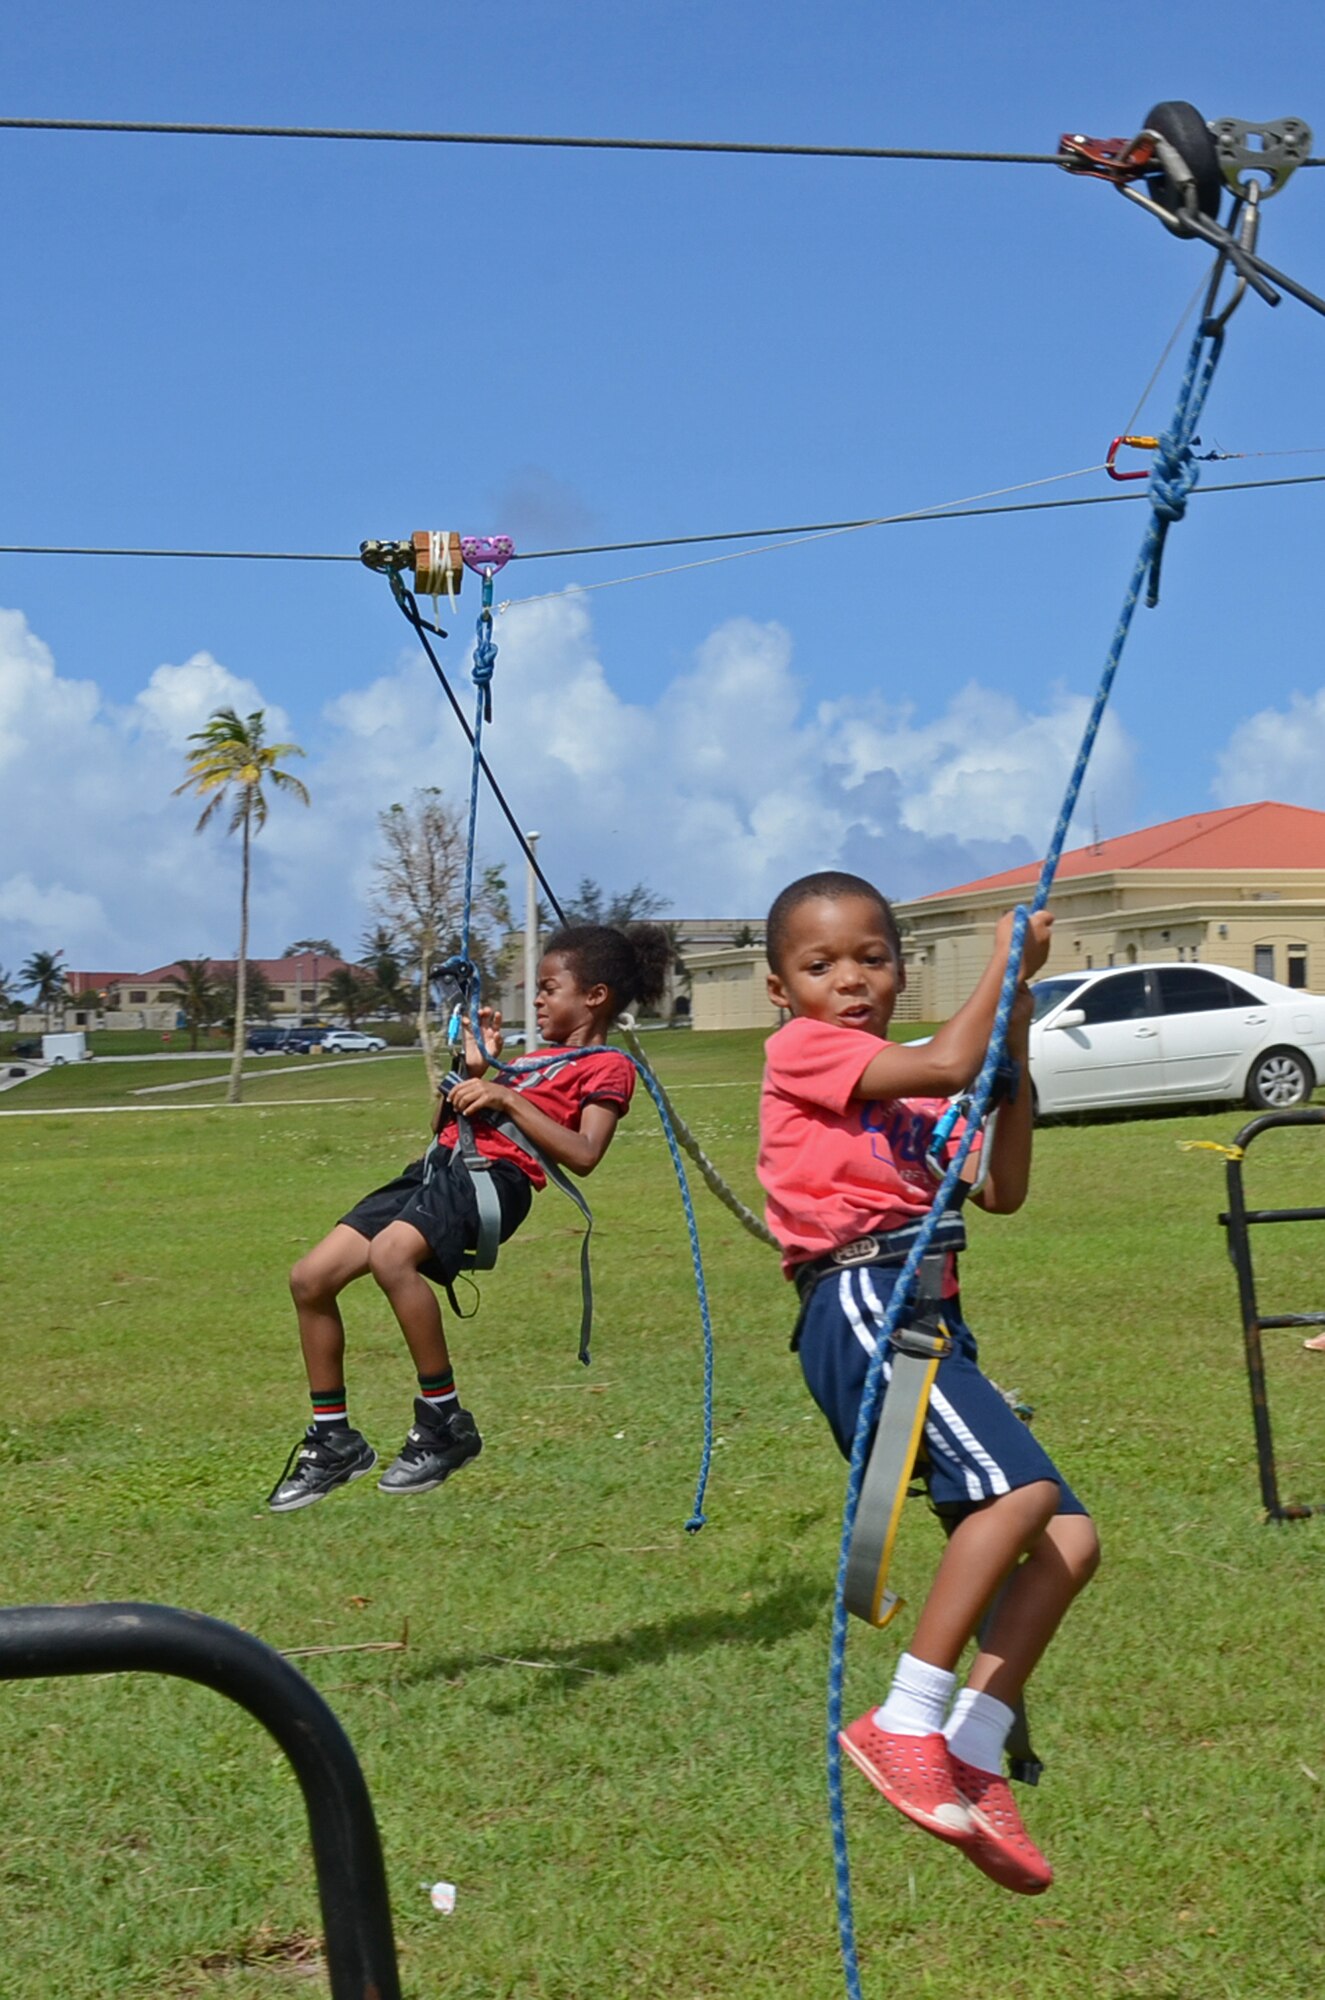 Andersen family members enjoy a ride on a zip line at the Memorial Day Bash May 25, 2015, at Andersen Air Force Base, Guam. The event included family friendly activities, such as zip lining, multiple bounce houses, food, a barbeque cook-off and a kids’ race track to entertain Team Andersen during the holiday commemoration. (U.S. Air Force photo by Airman 1st Class Alexa Ann Henderson/Released)